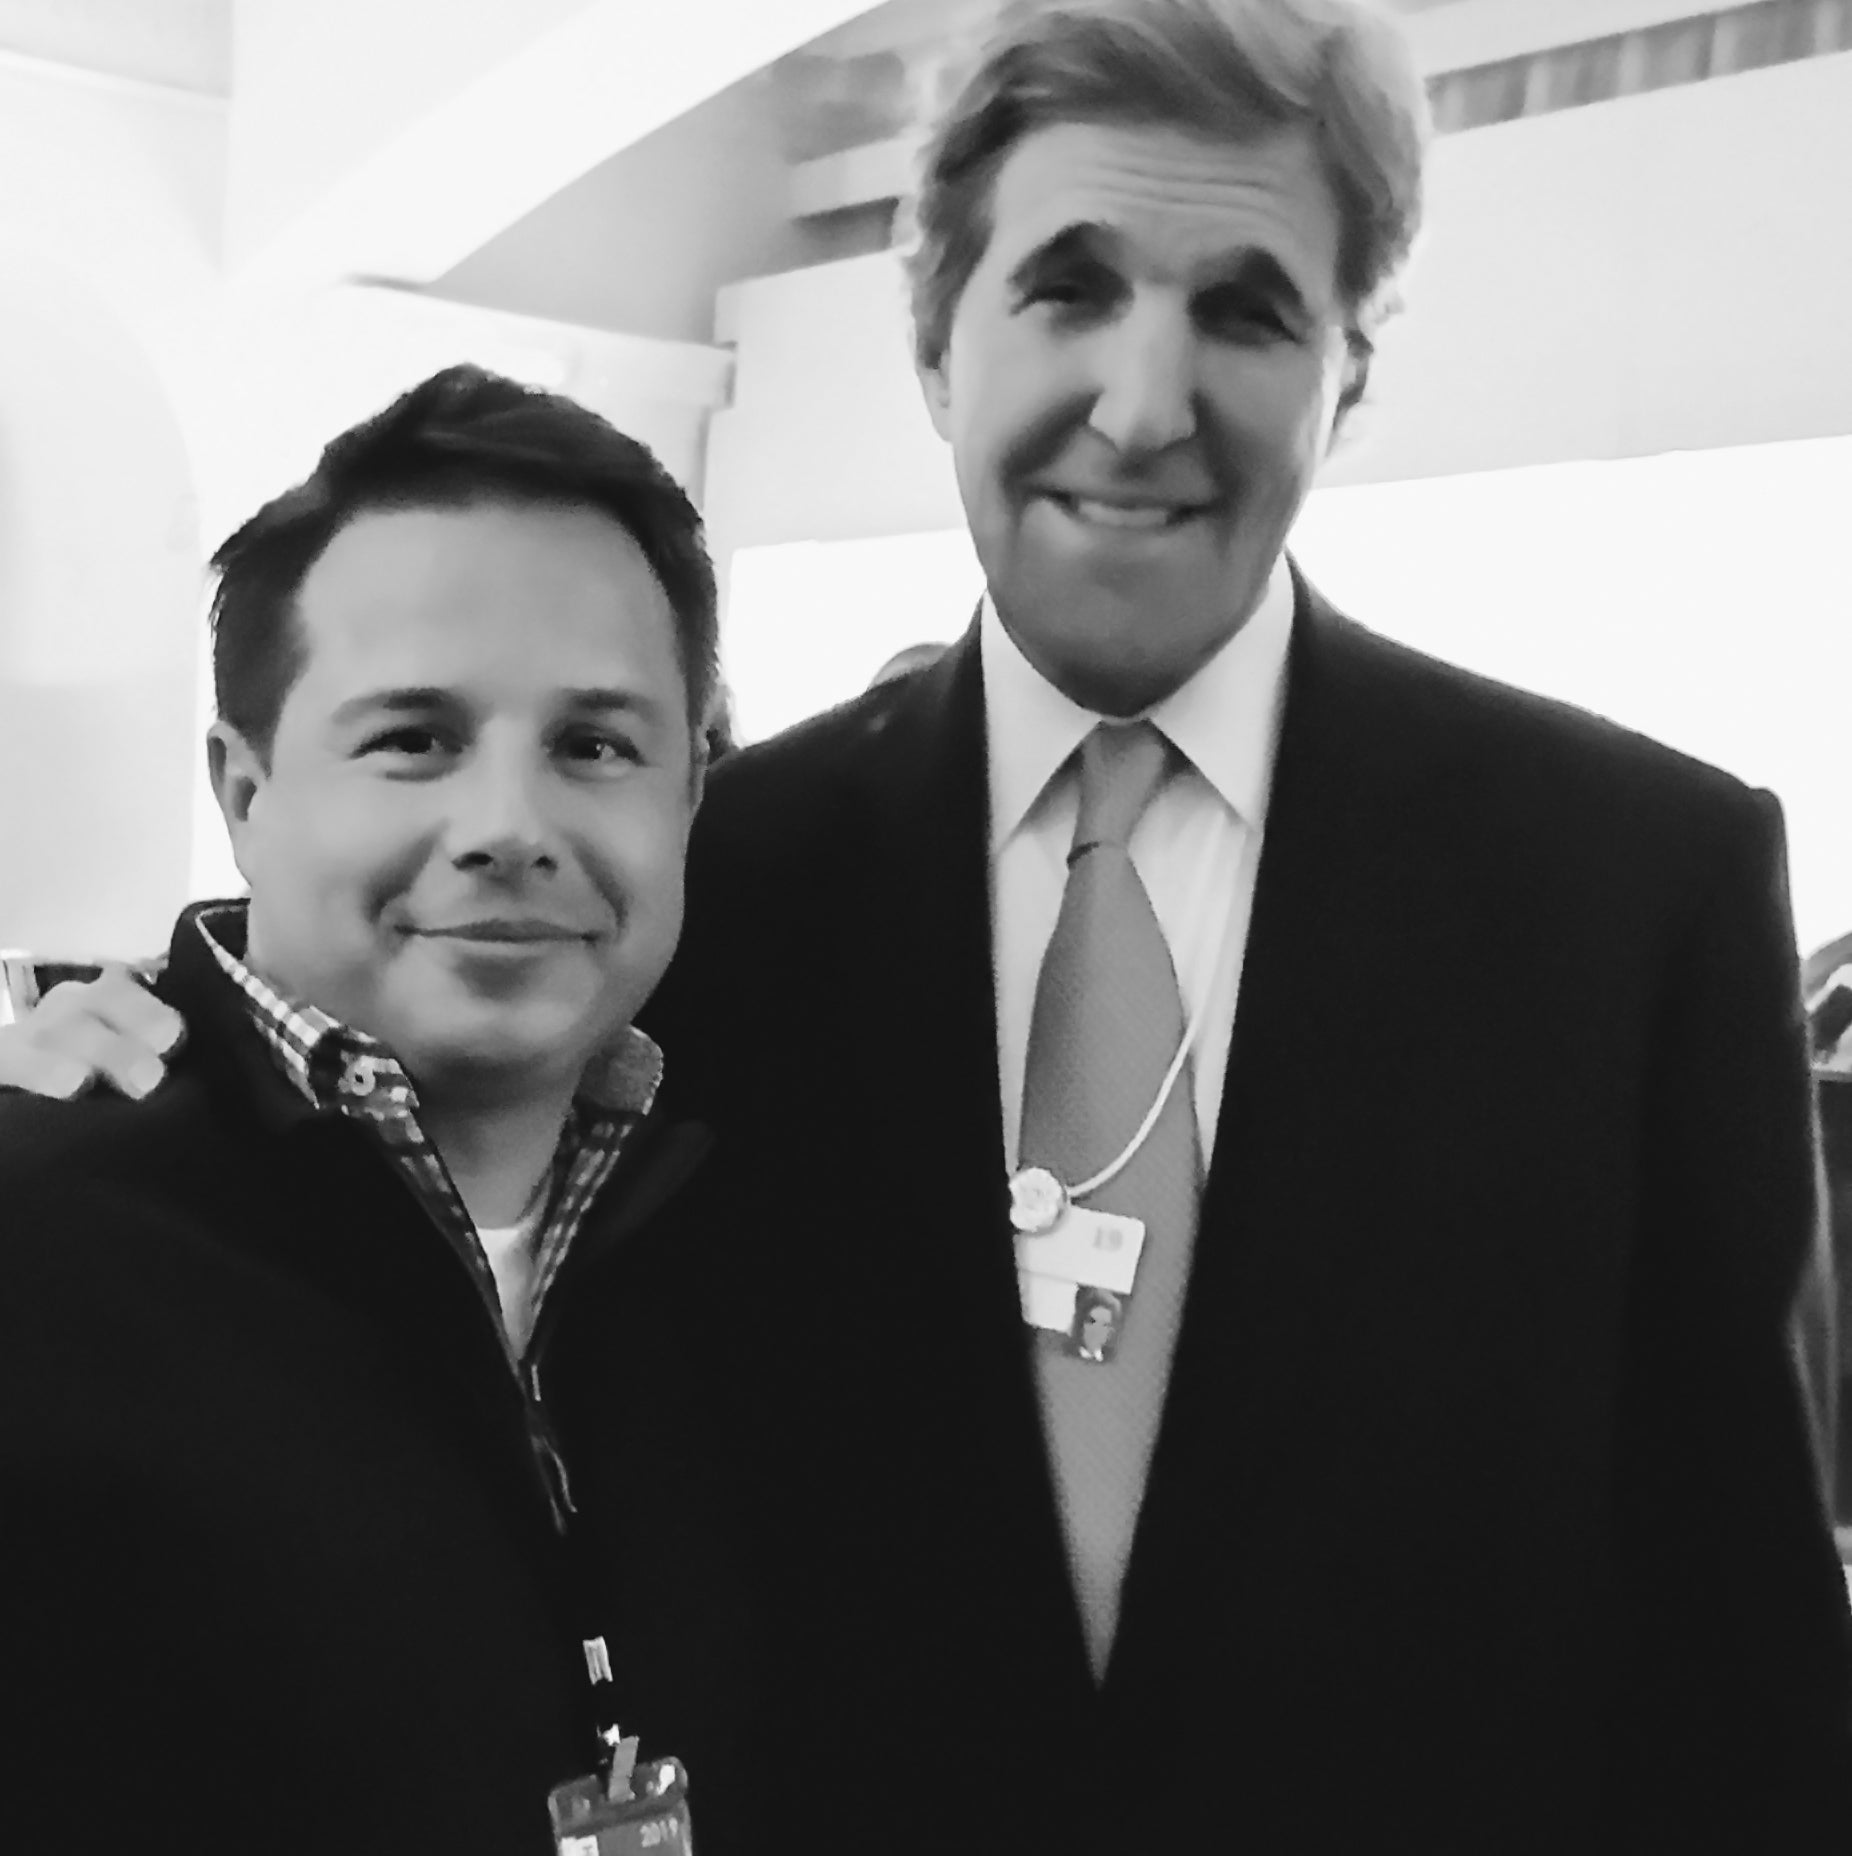 Conversations in Davos With John Kerry on Energy, Healthcare, and the Financial System